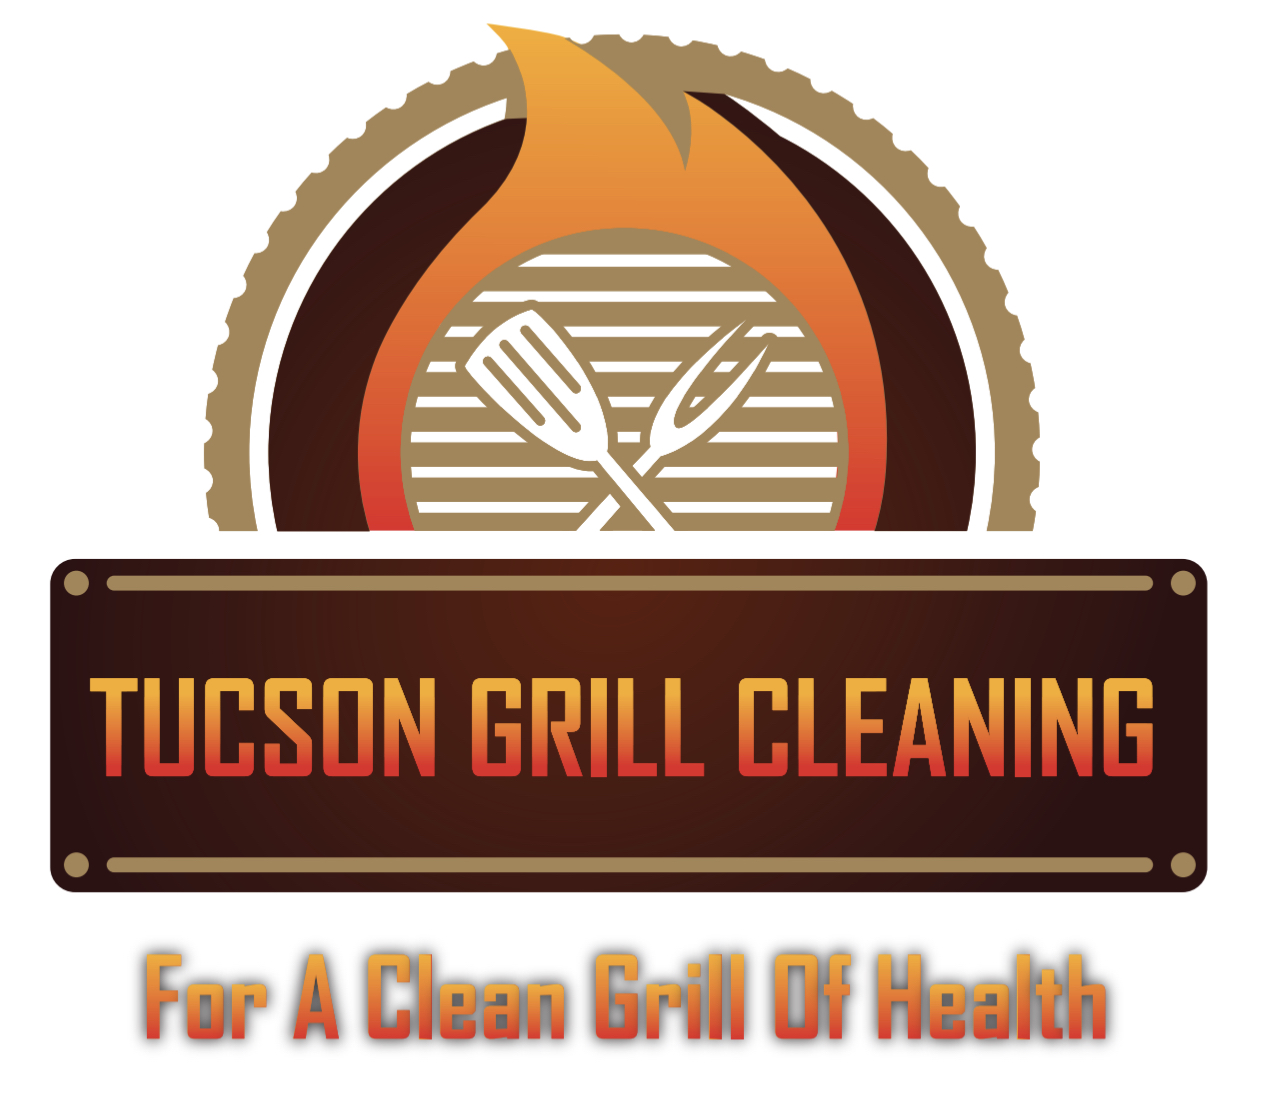 Tucson Grill Cleaning logo with text, crossed spatula and meat fork.